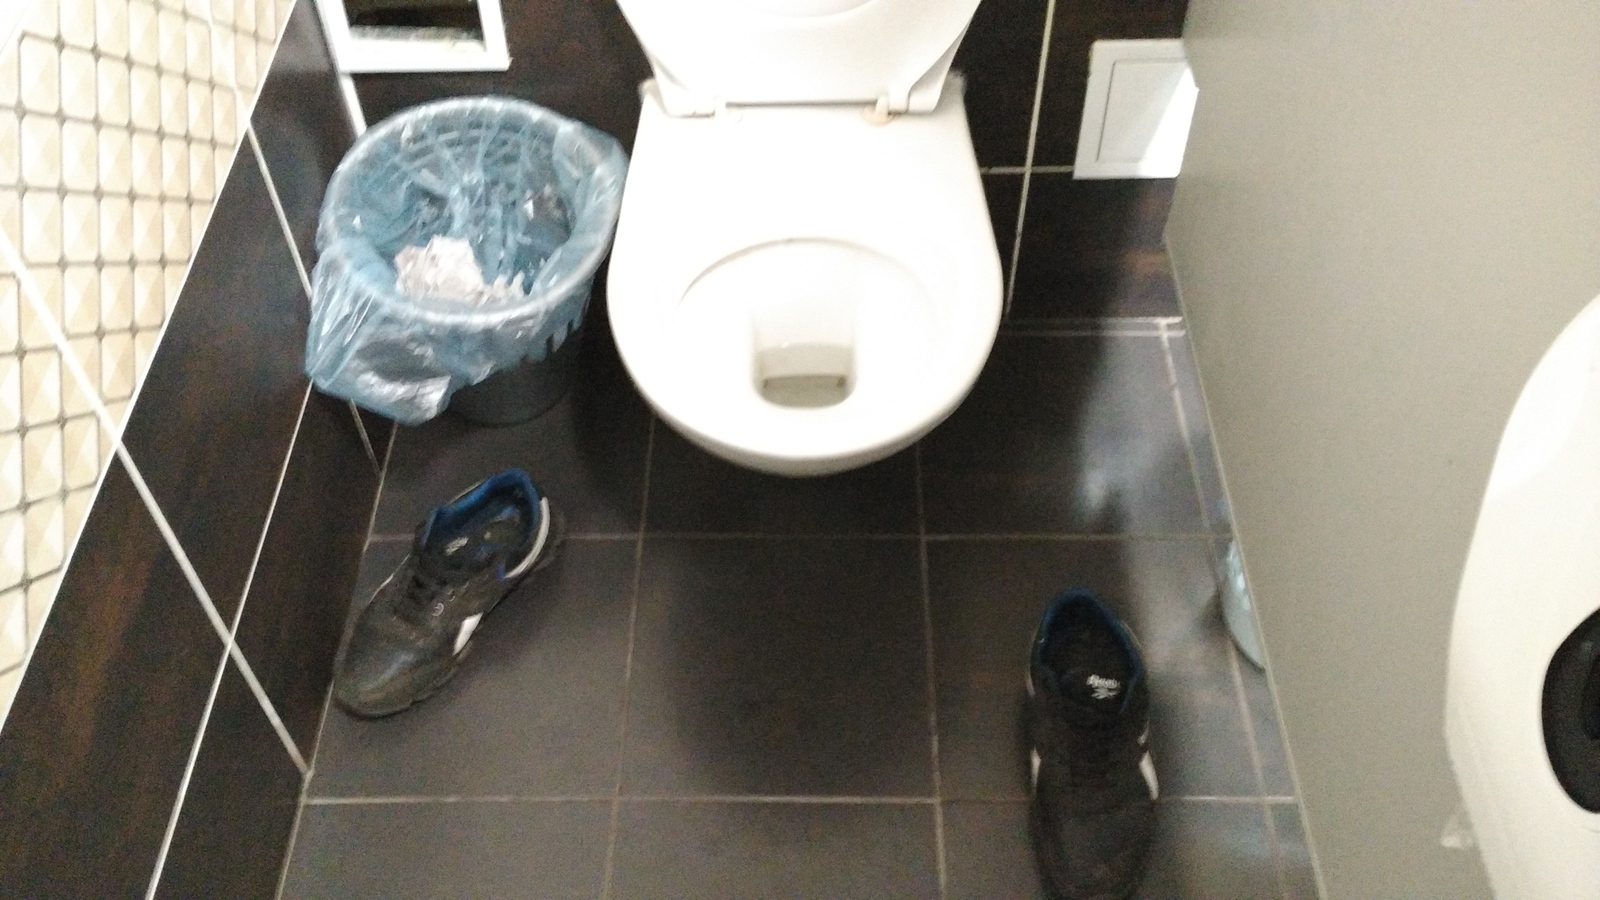 Intrigue in the shopping center - Toilet, Shopping center, Shoes, WTF, Washed away